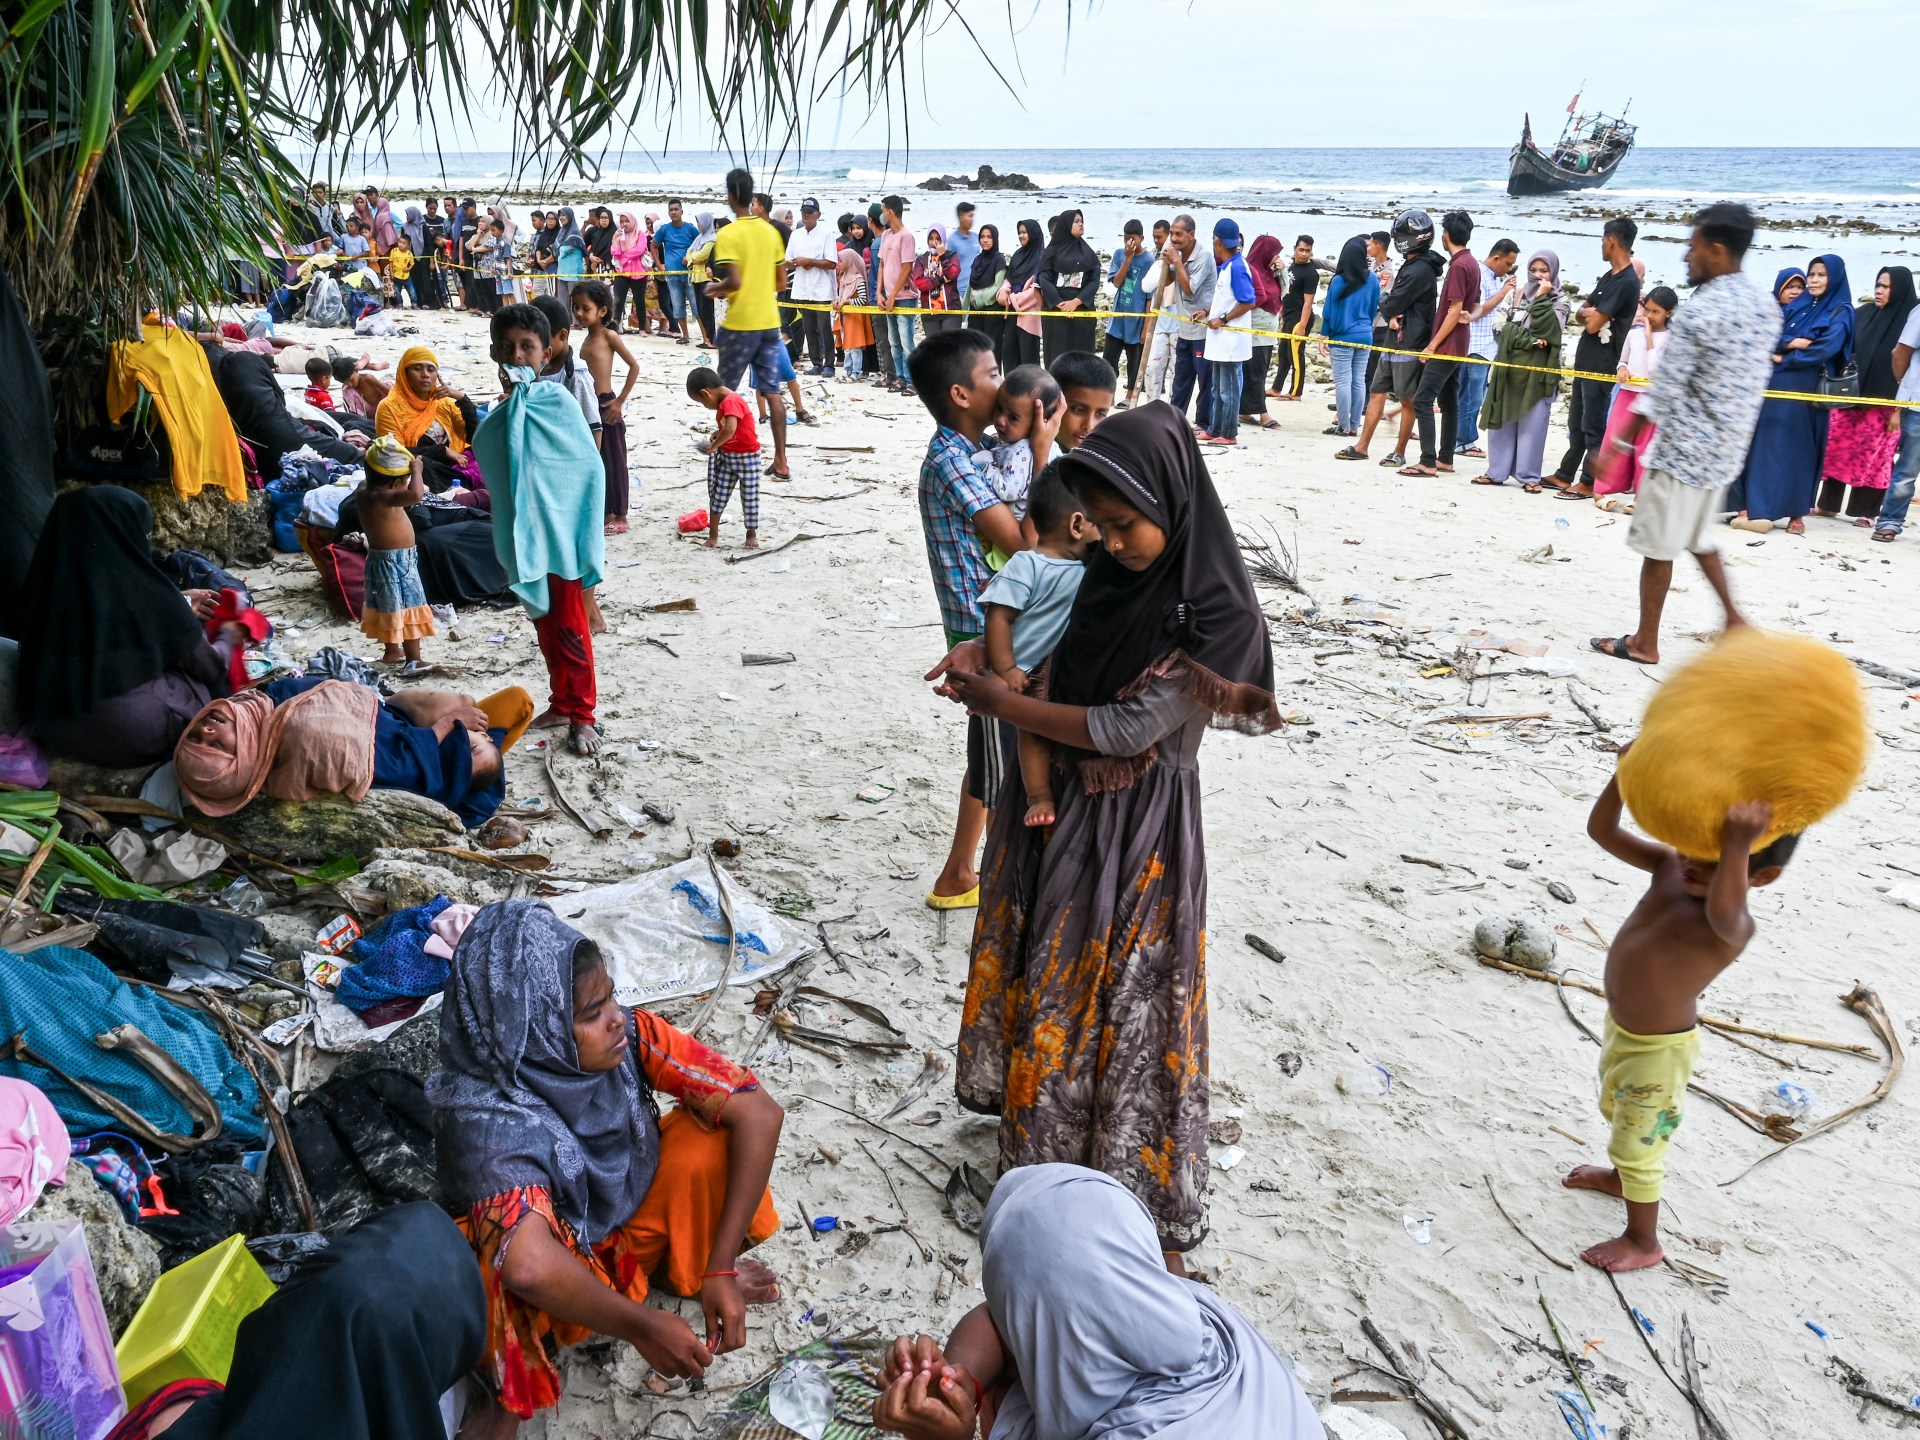 Rohingya refugees reach Indonesia shores in latest boat arrival